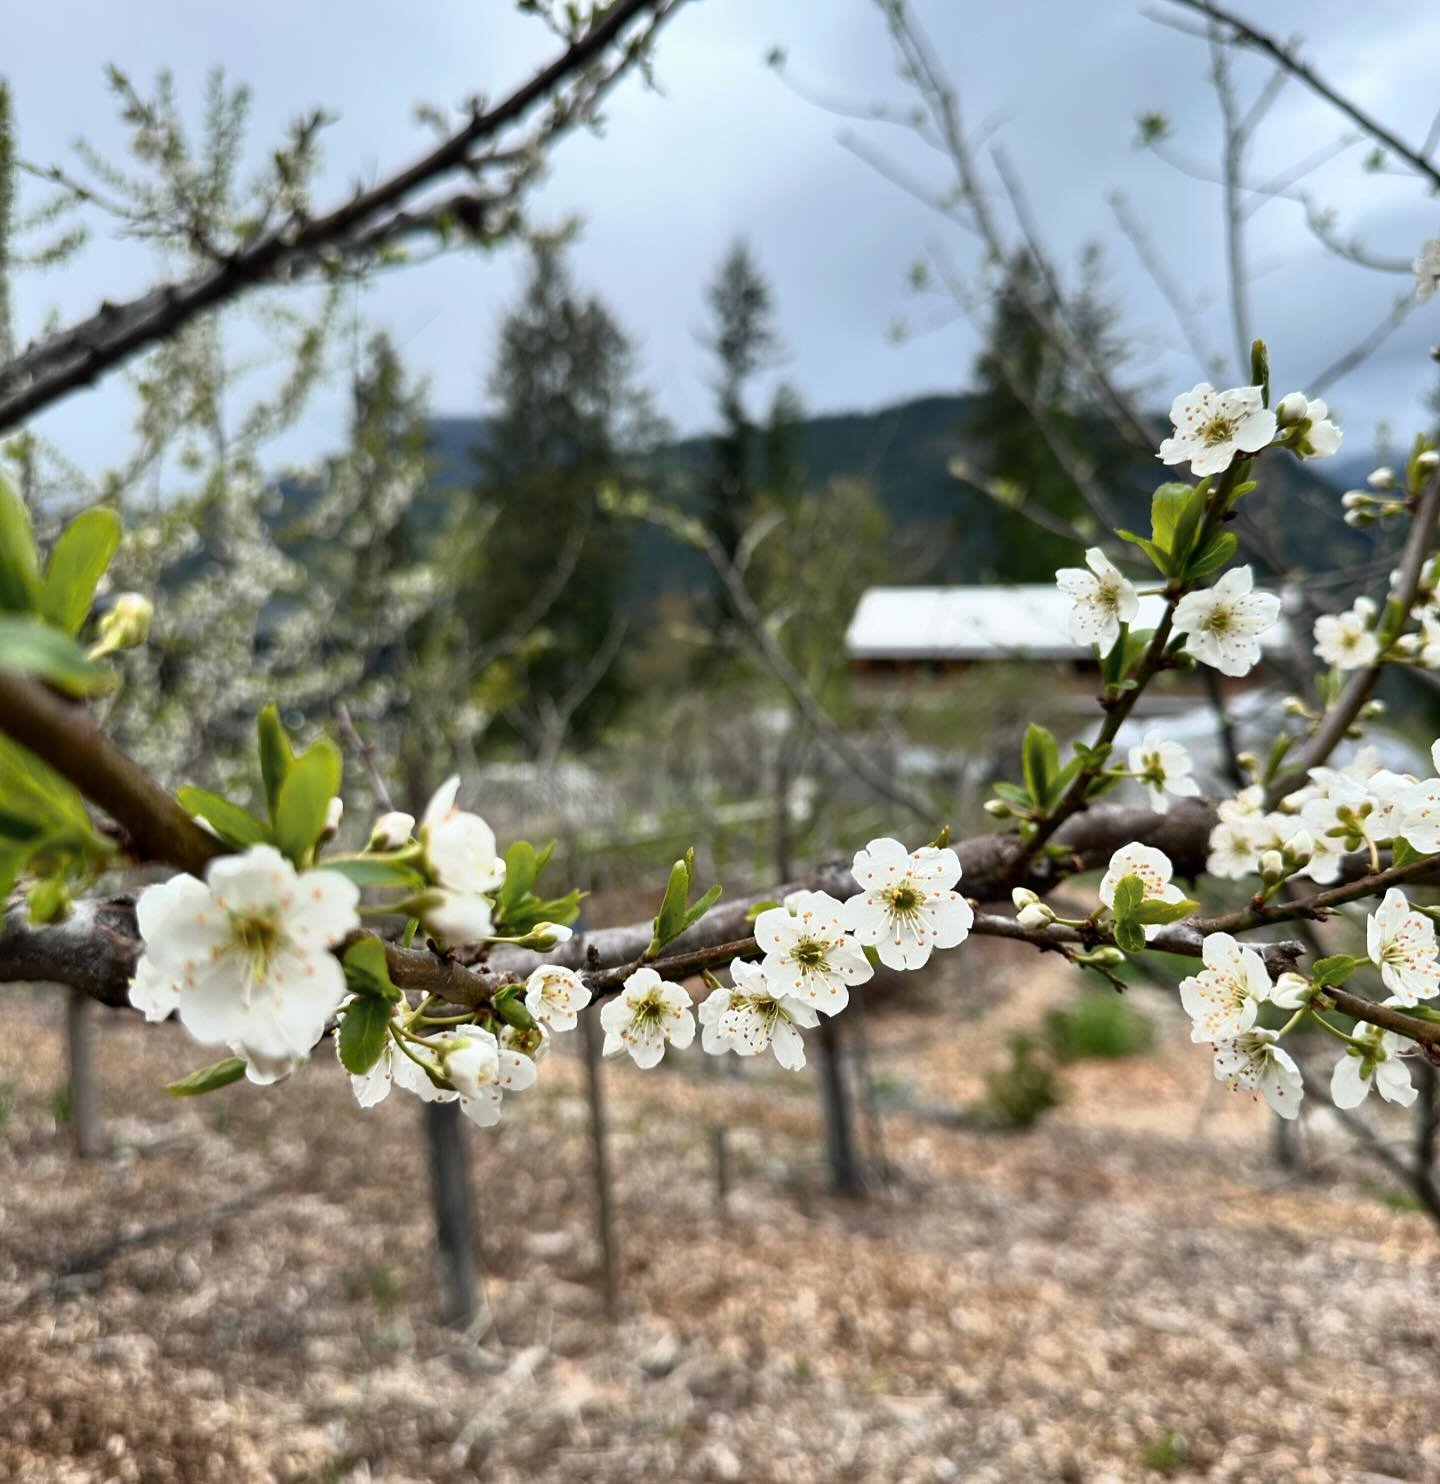 Plum blossoms are out, along with fresh snow on the mountains around us and a real chill in the air!